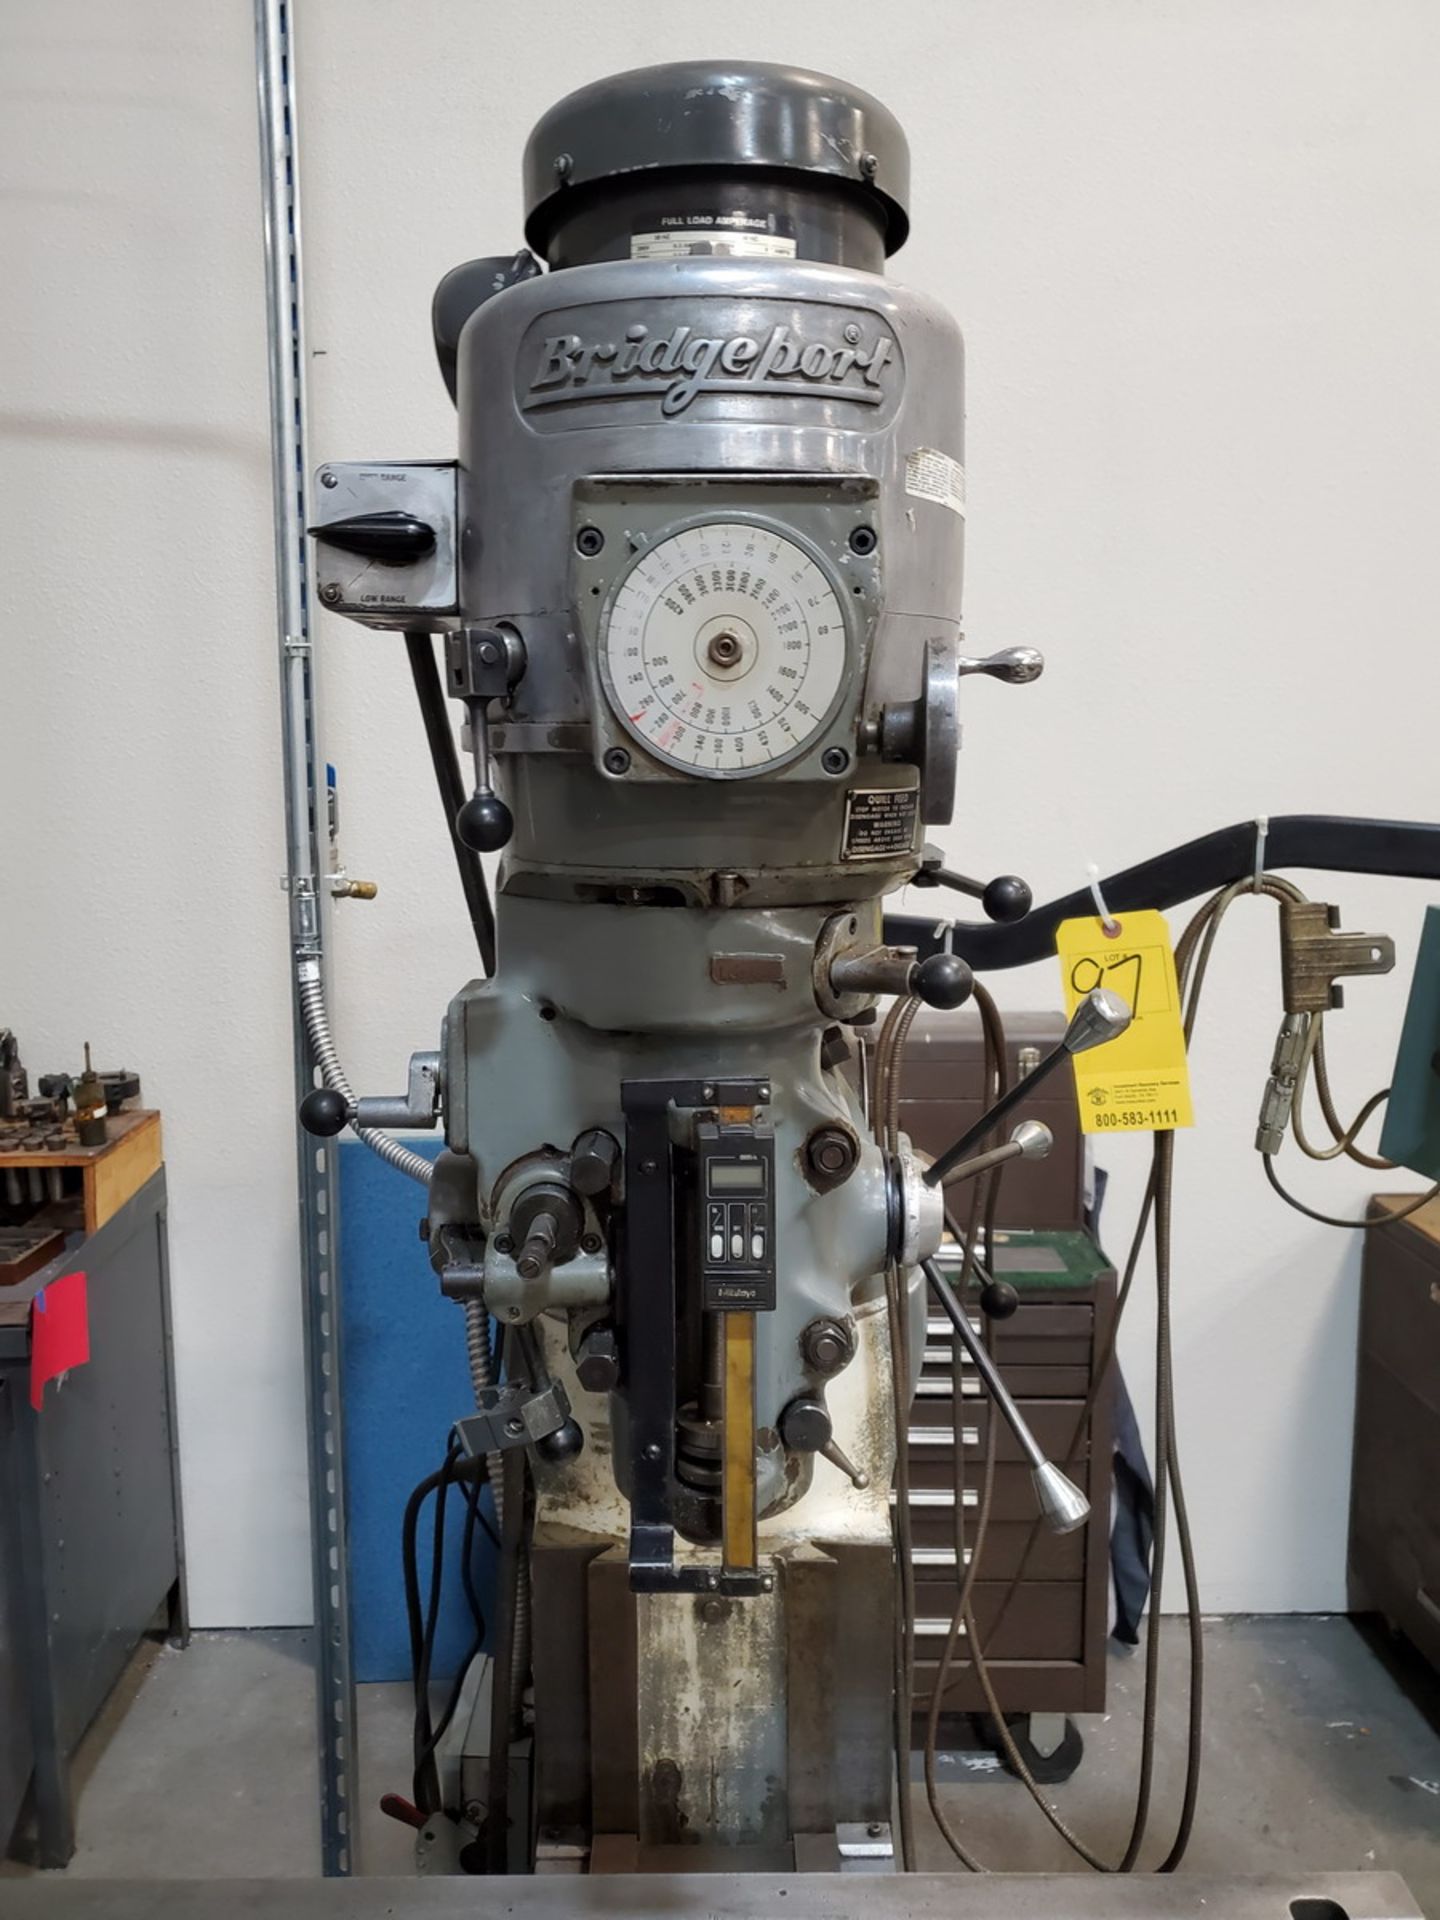 Bridgeport Vertical Milling Machine W/ Acu-Rite Controller, 220V, 3PH, 2HP, X/Y/Z Axis; T-Slot - Image 8 of 18